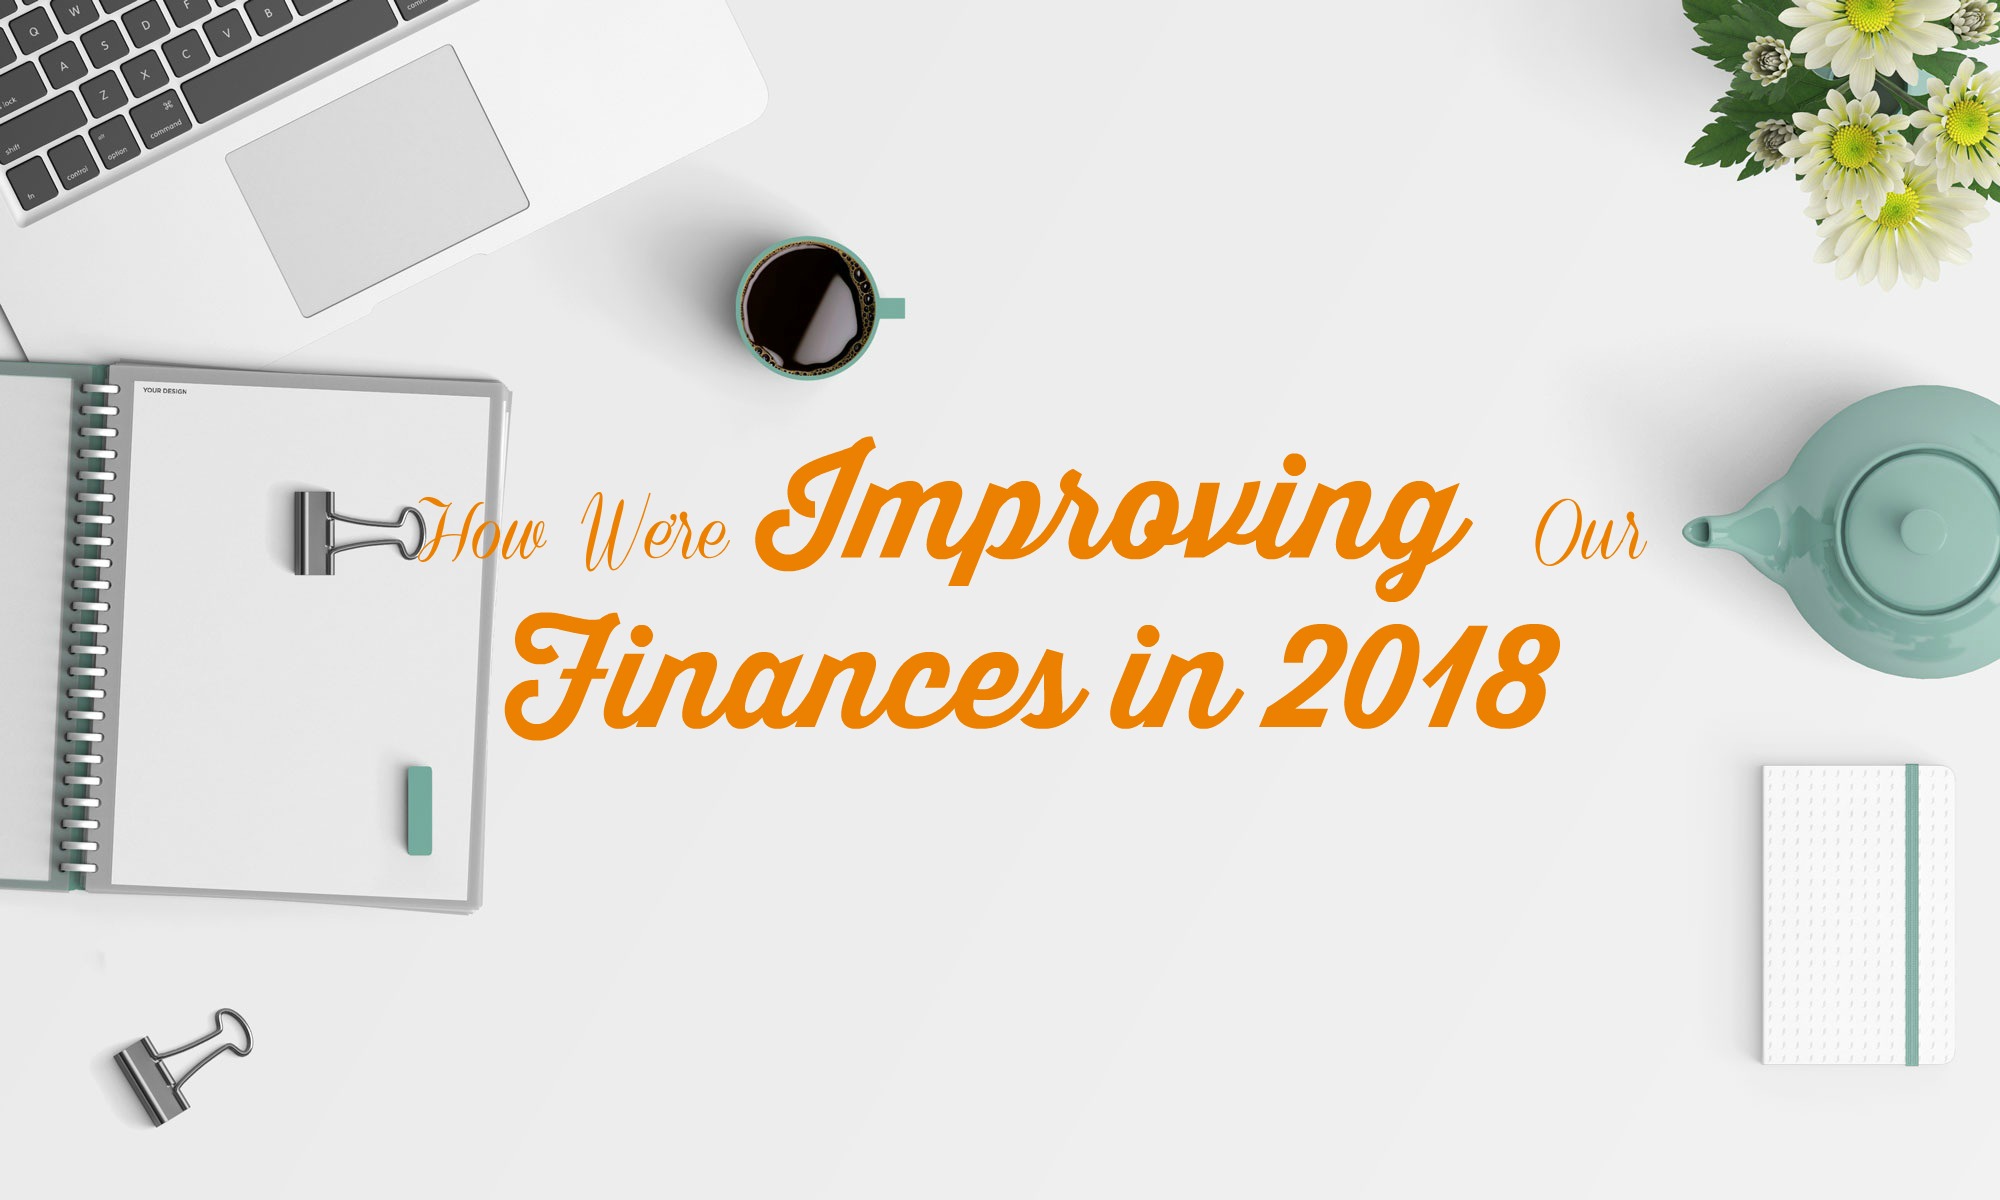 How We’re Improving Our Finances in 2018